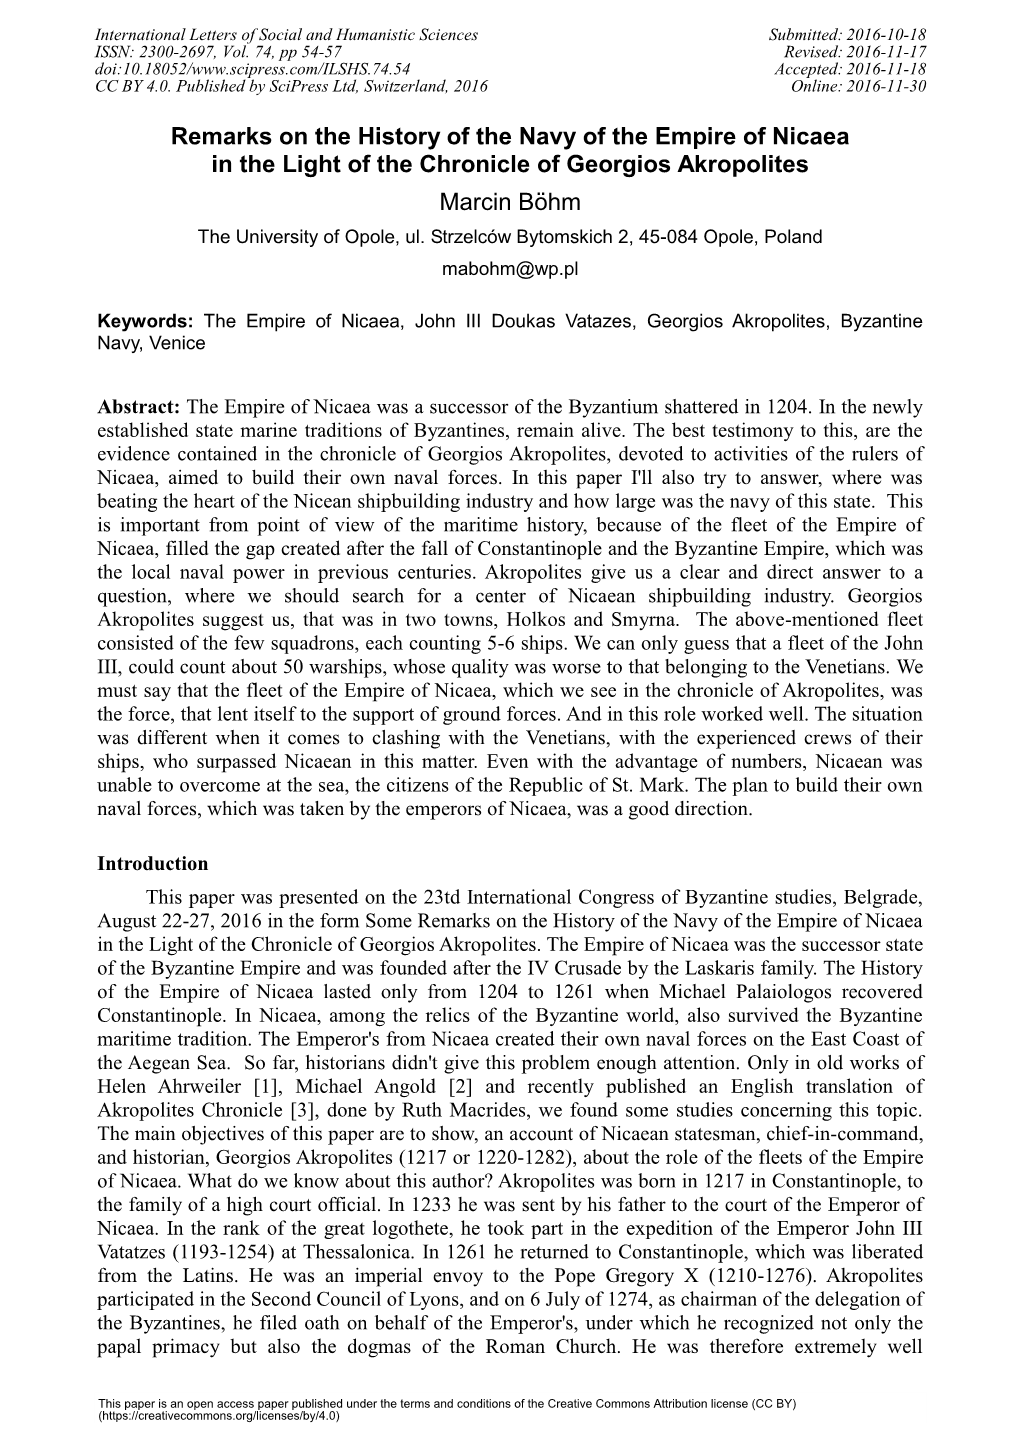 Remarks on the History of the Navy of the Empire of Nicaea in the Light of the Chronicle of Georgios Akropolites Marcin Böhm the University of Opole, Ul